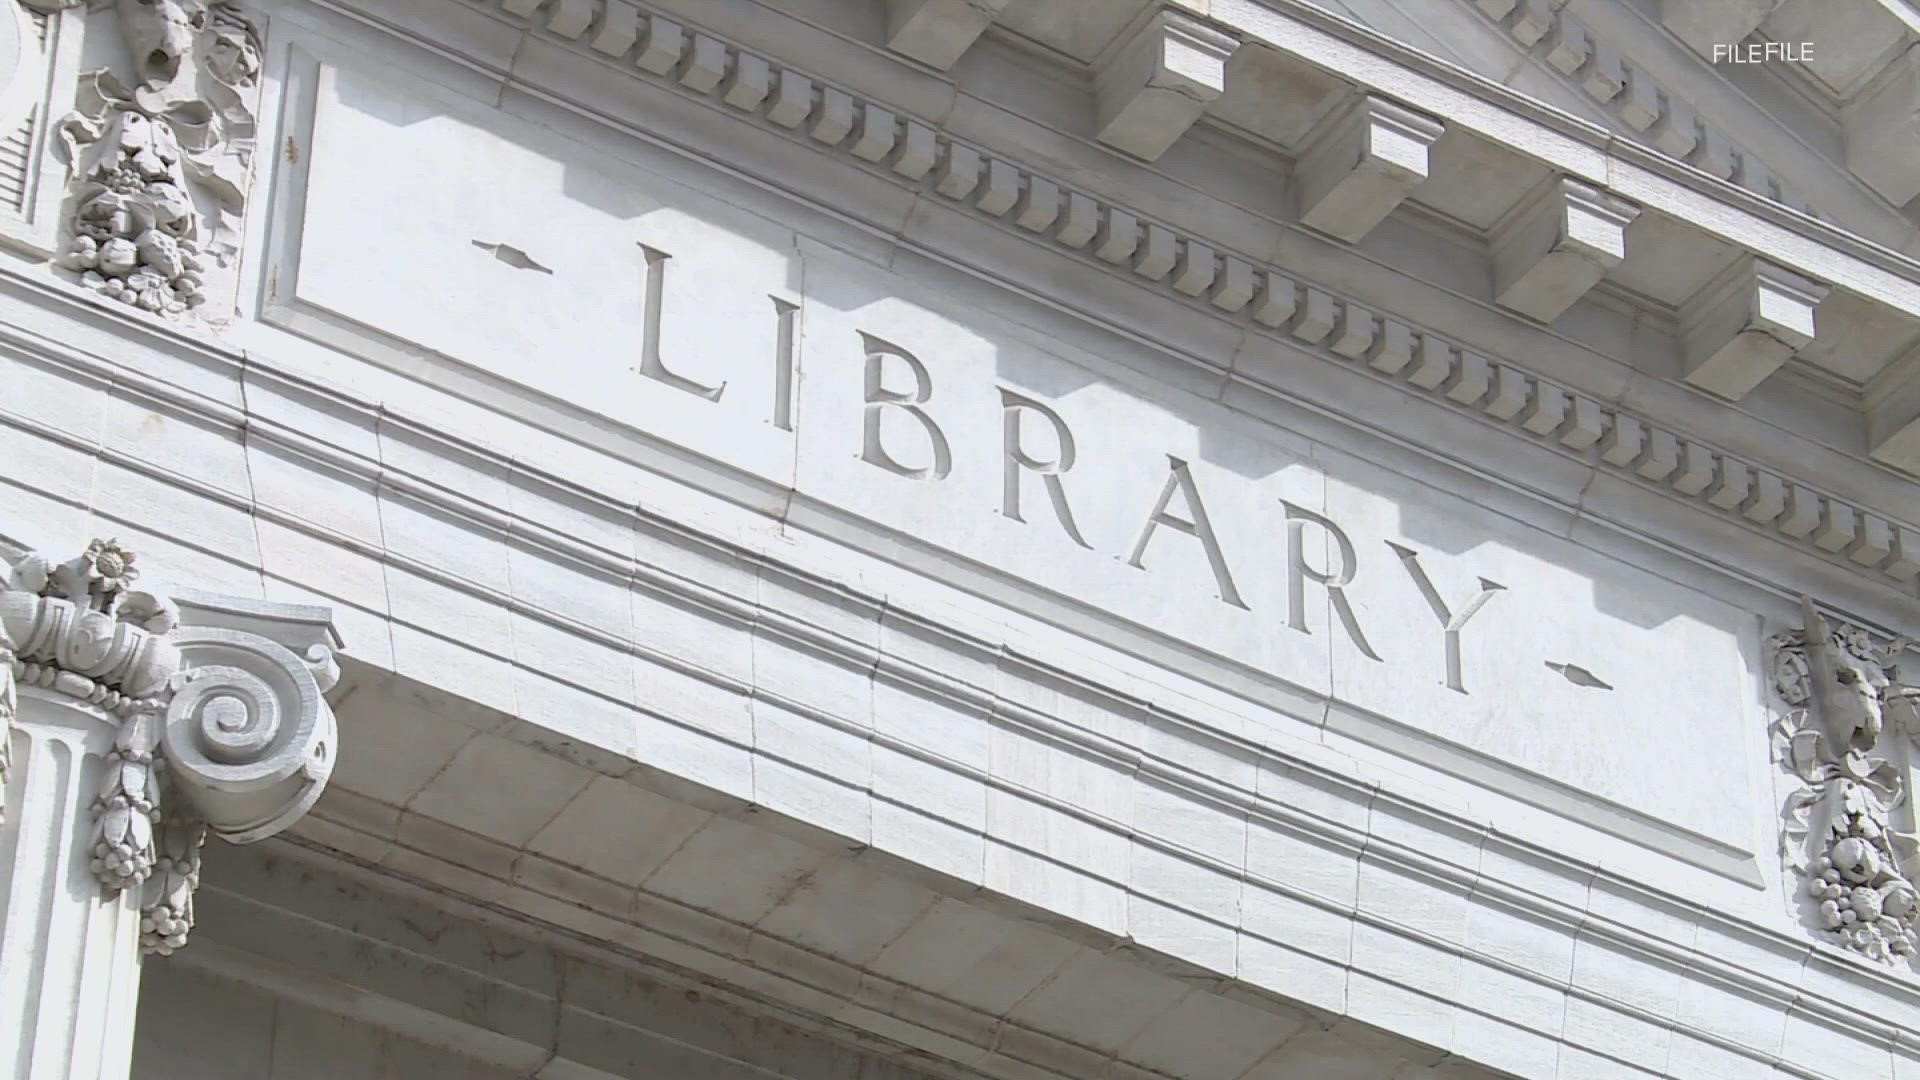 A library spokesperson told WHAS11 News more than 30,000 students have signed up for the summer reading program.